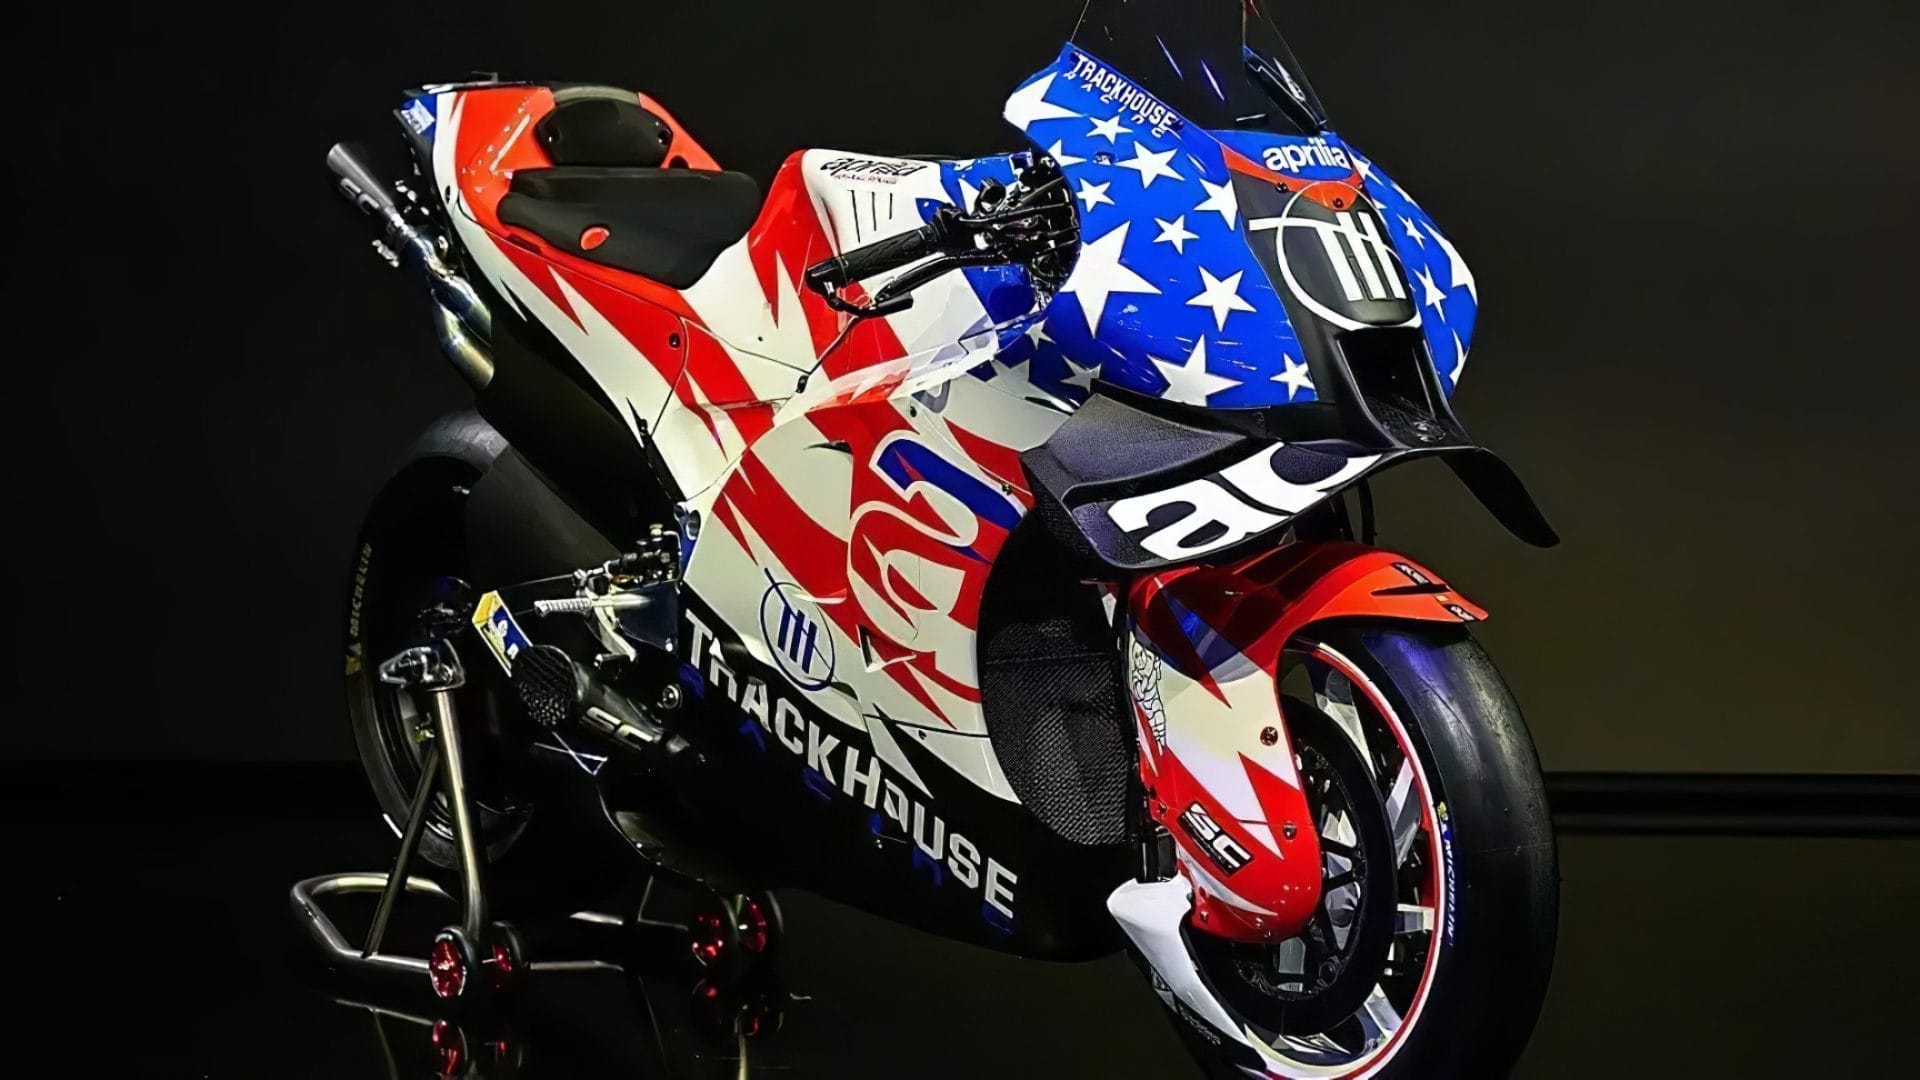 Trackhouse Racing: A new era in MotoGP with American flair